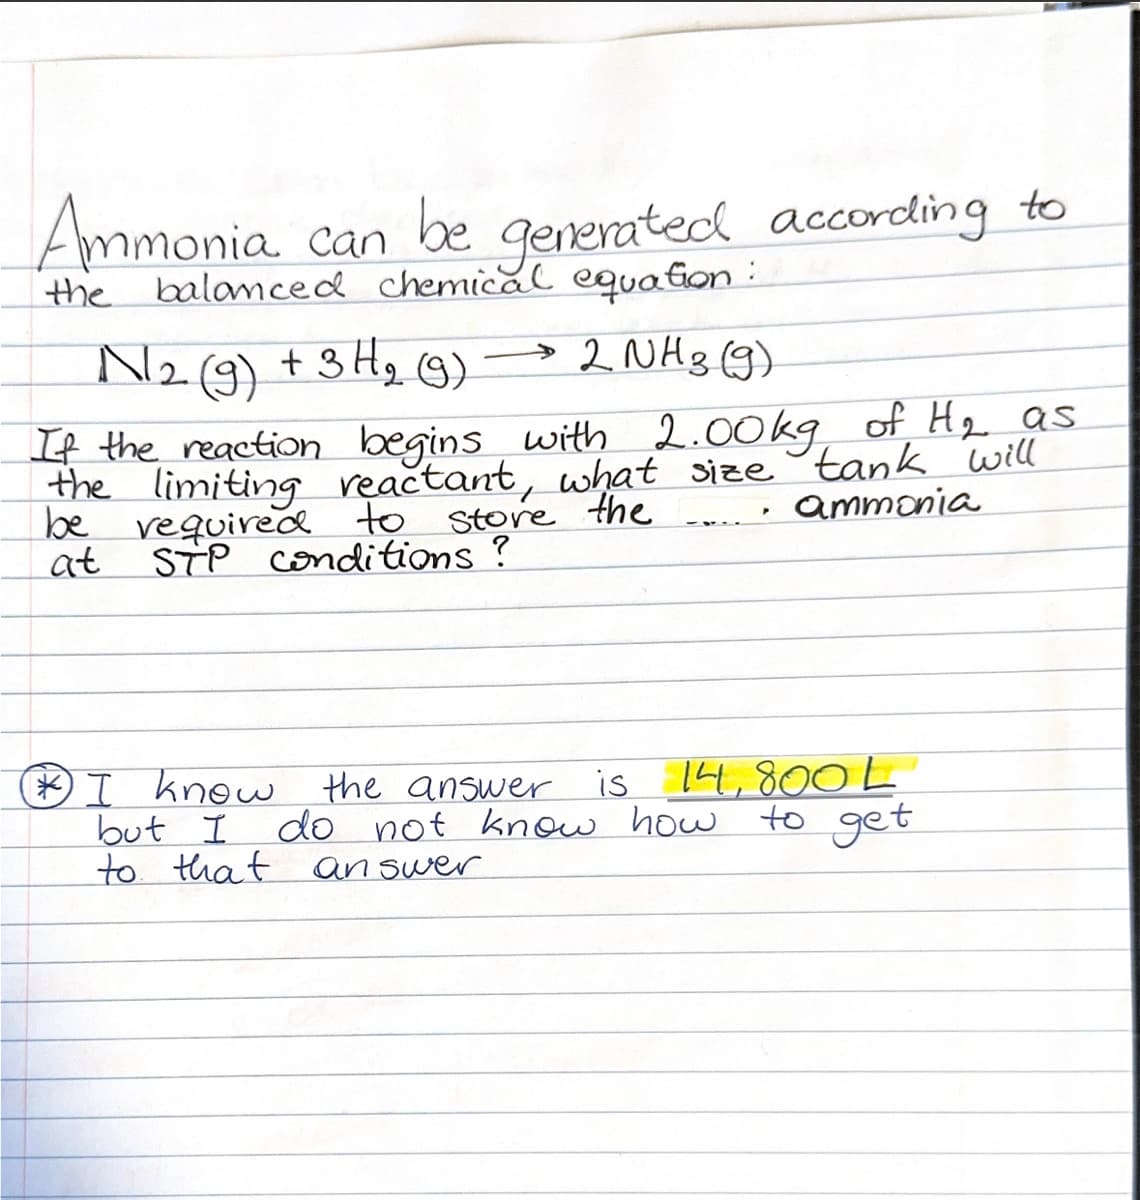 Ammonia can be
inia can be generated according to
the balanced chemical equation
N2 (9) + 3H₂ (9)
→ 2 NH 3 (9)
If the reaction begins with 2.00kg of H₂ as
the limiting reactant, what size tank will
be required to store the
"
ammonia
at
STP conditions?
* I know the answer is 14,800 L
but I
to that answer
do not know how to get